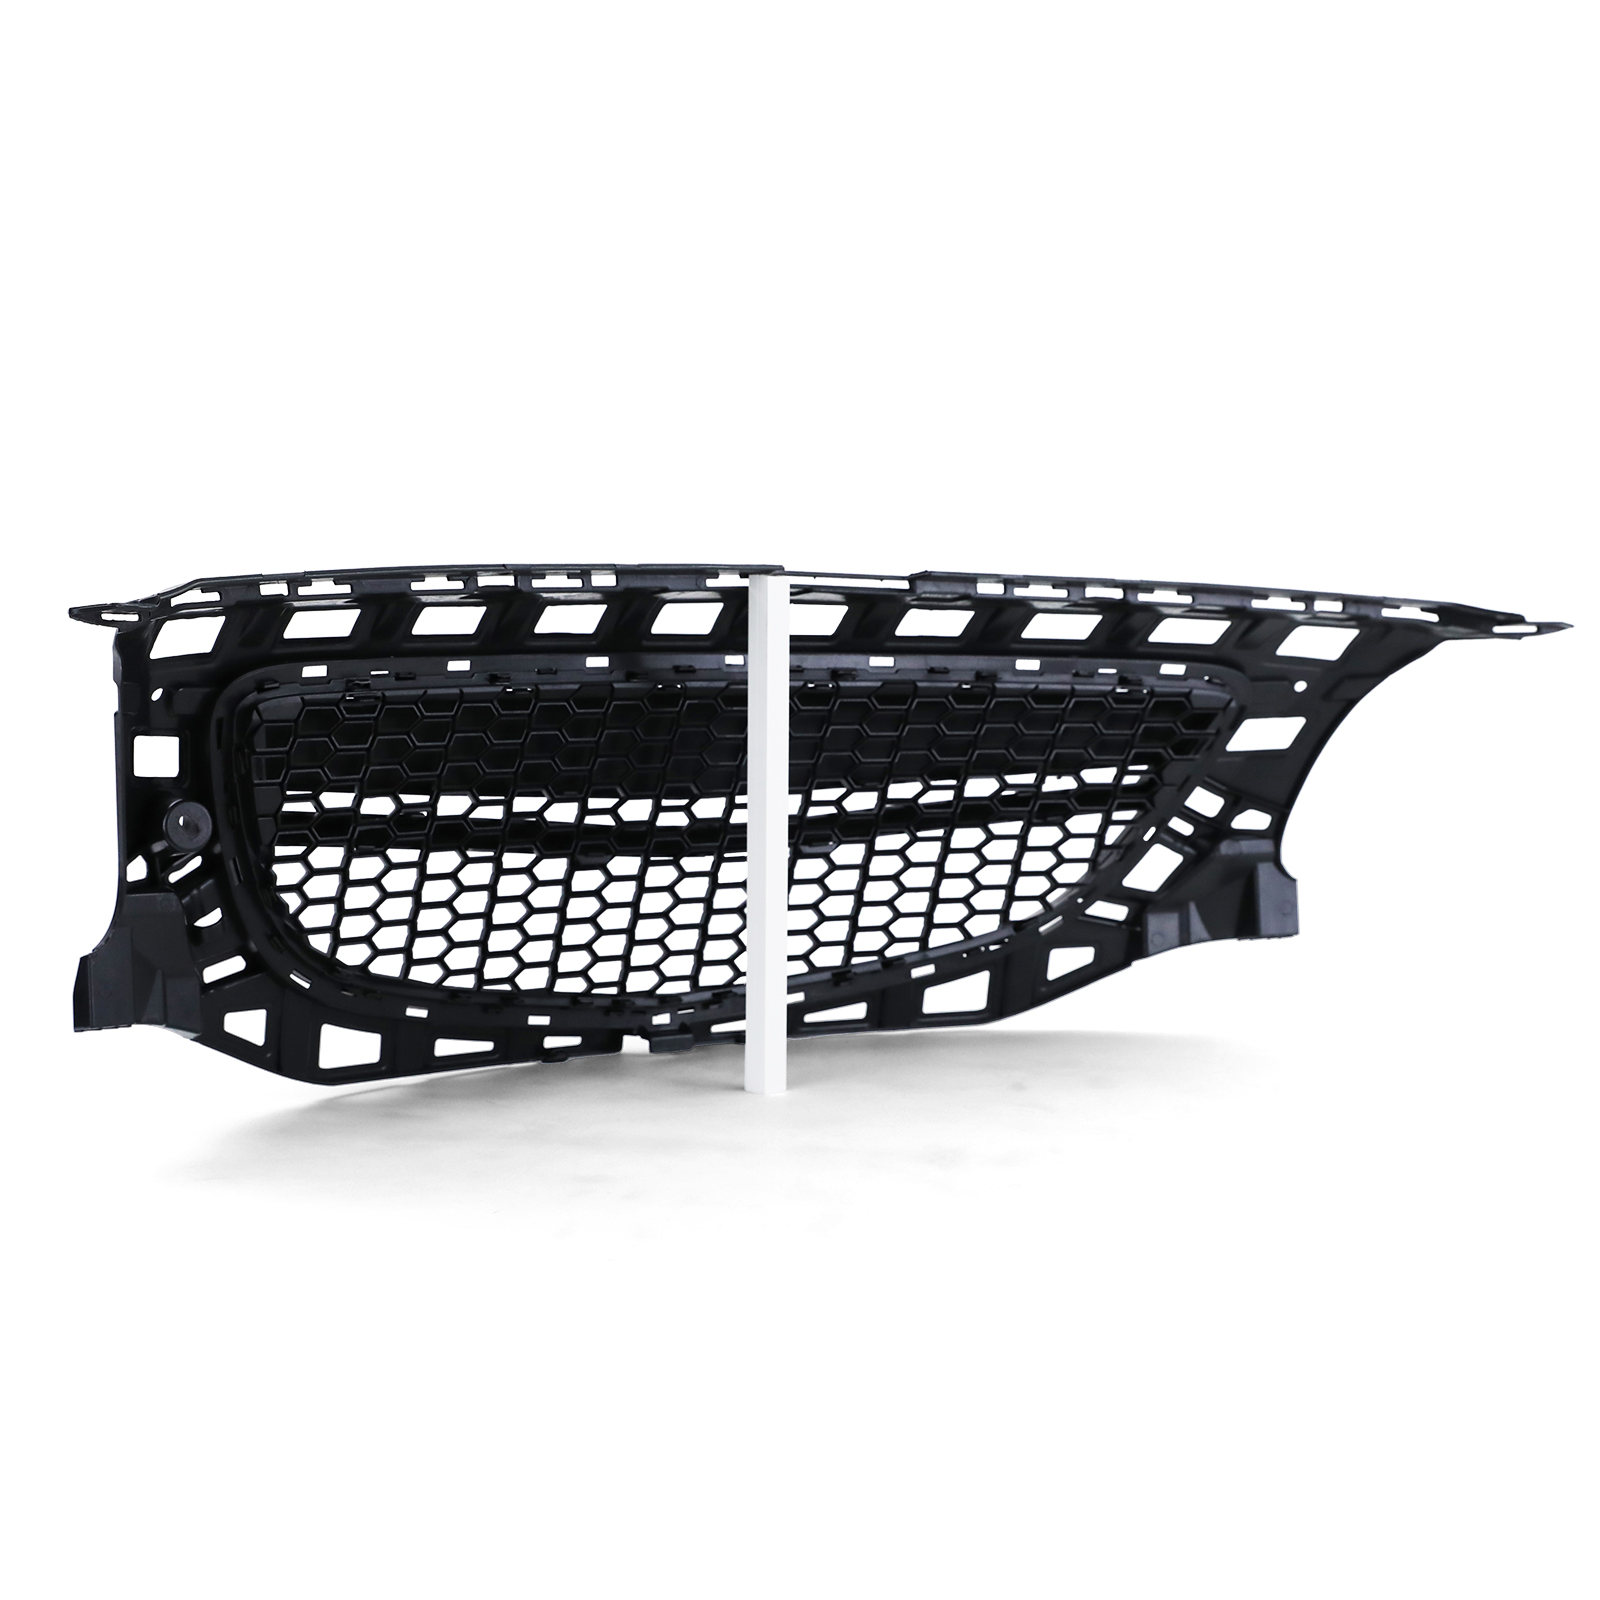 Radiator grill sports grill without emblem OPC black for Opel Insignia 08-13